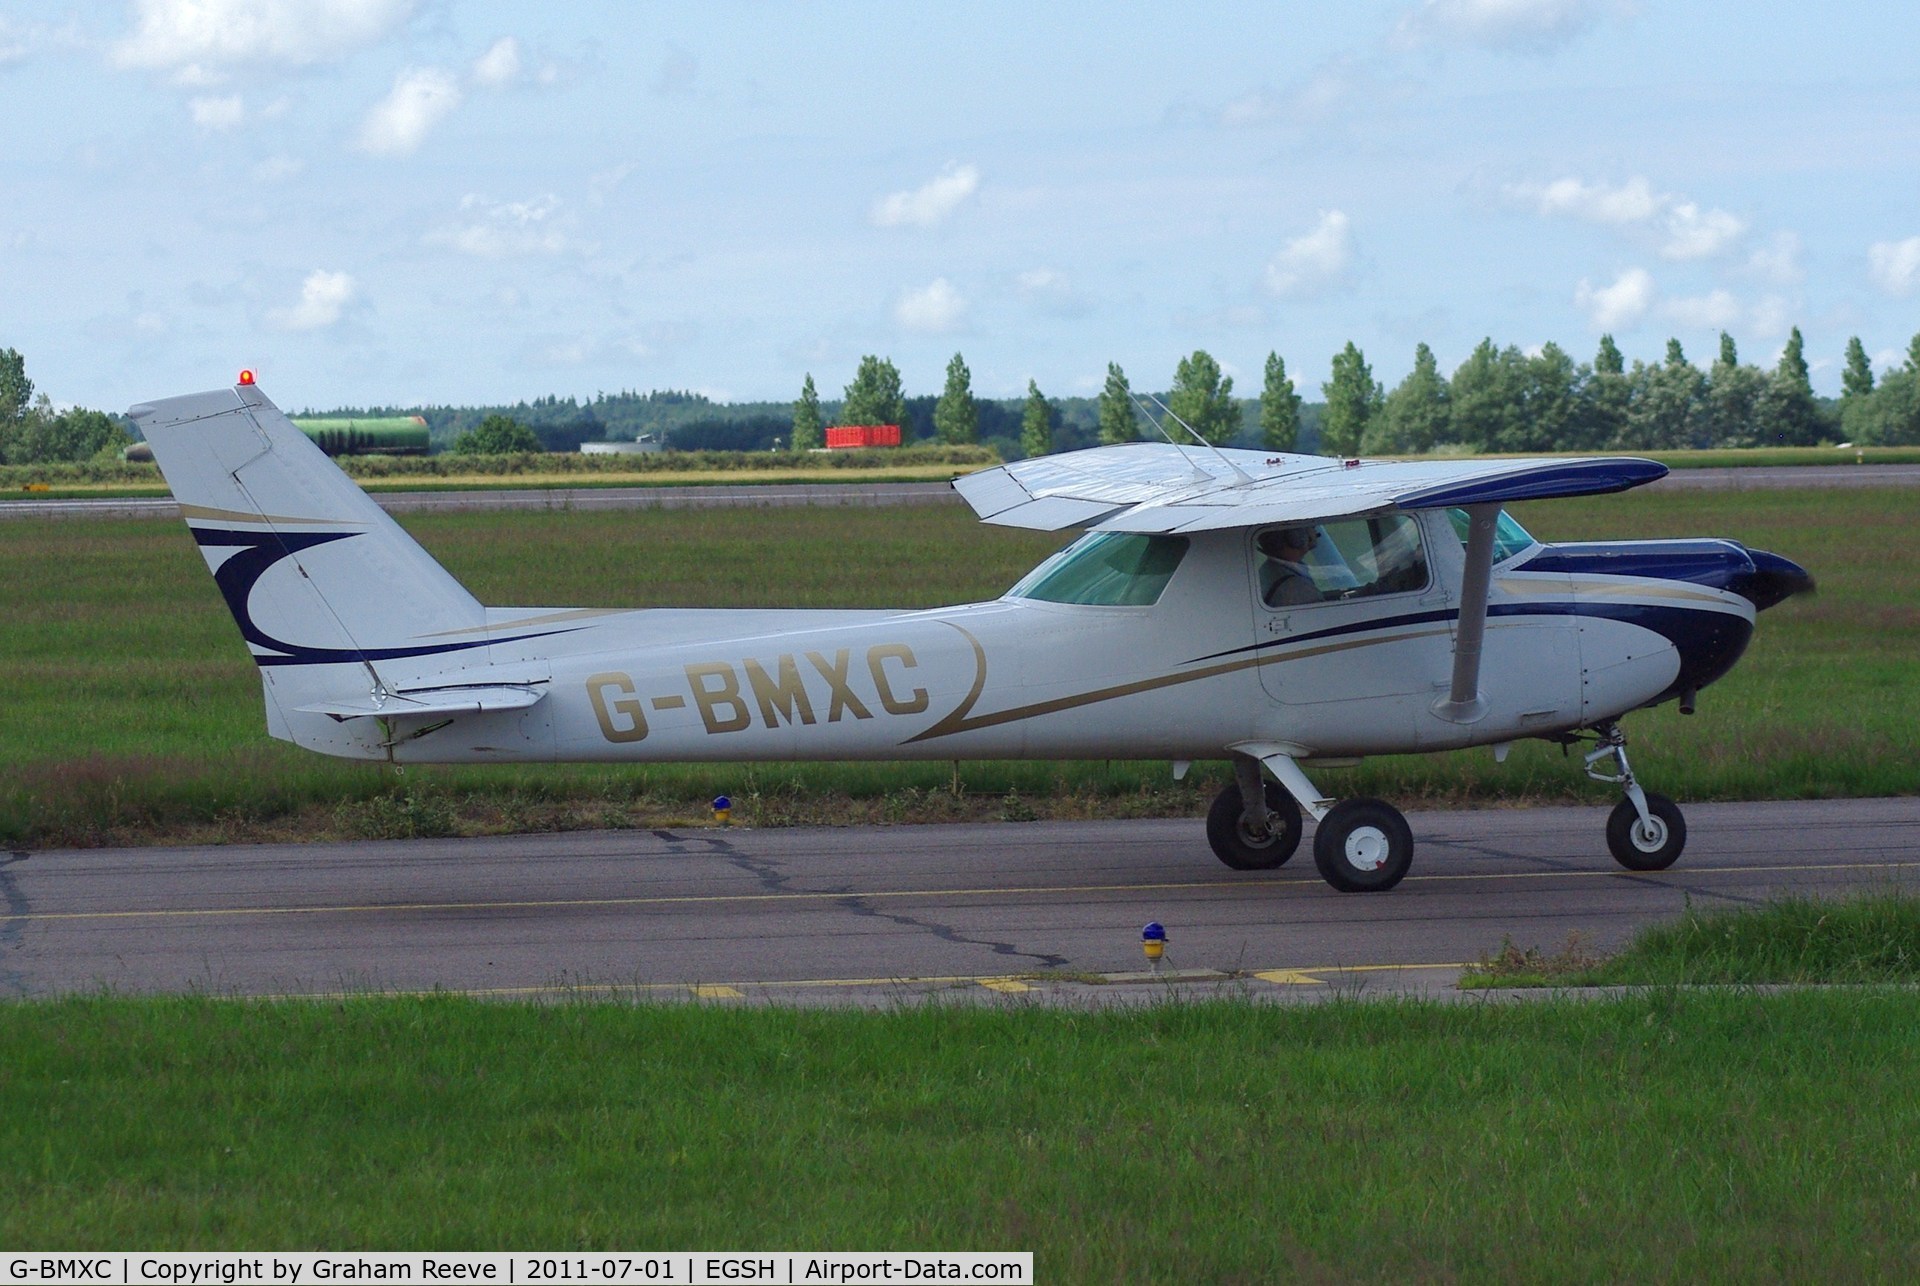 G-BMXC, 1977 Cessna 152 C/N 152-80416, About to depart on 27.